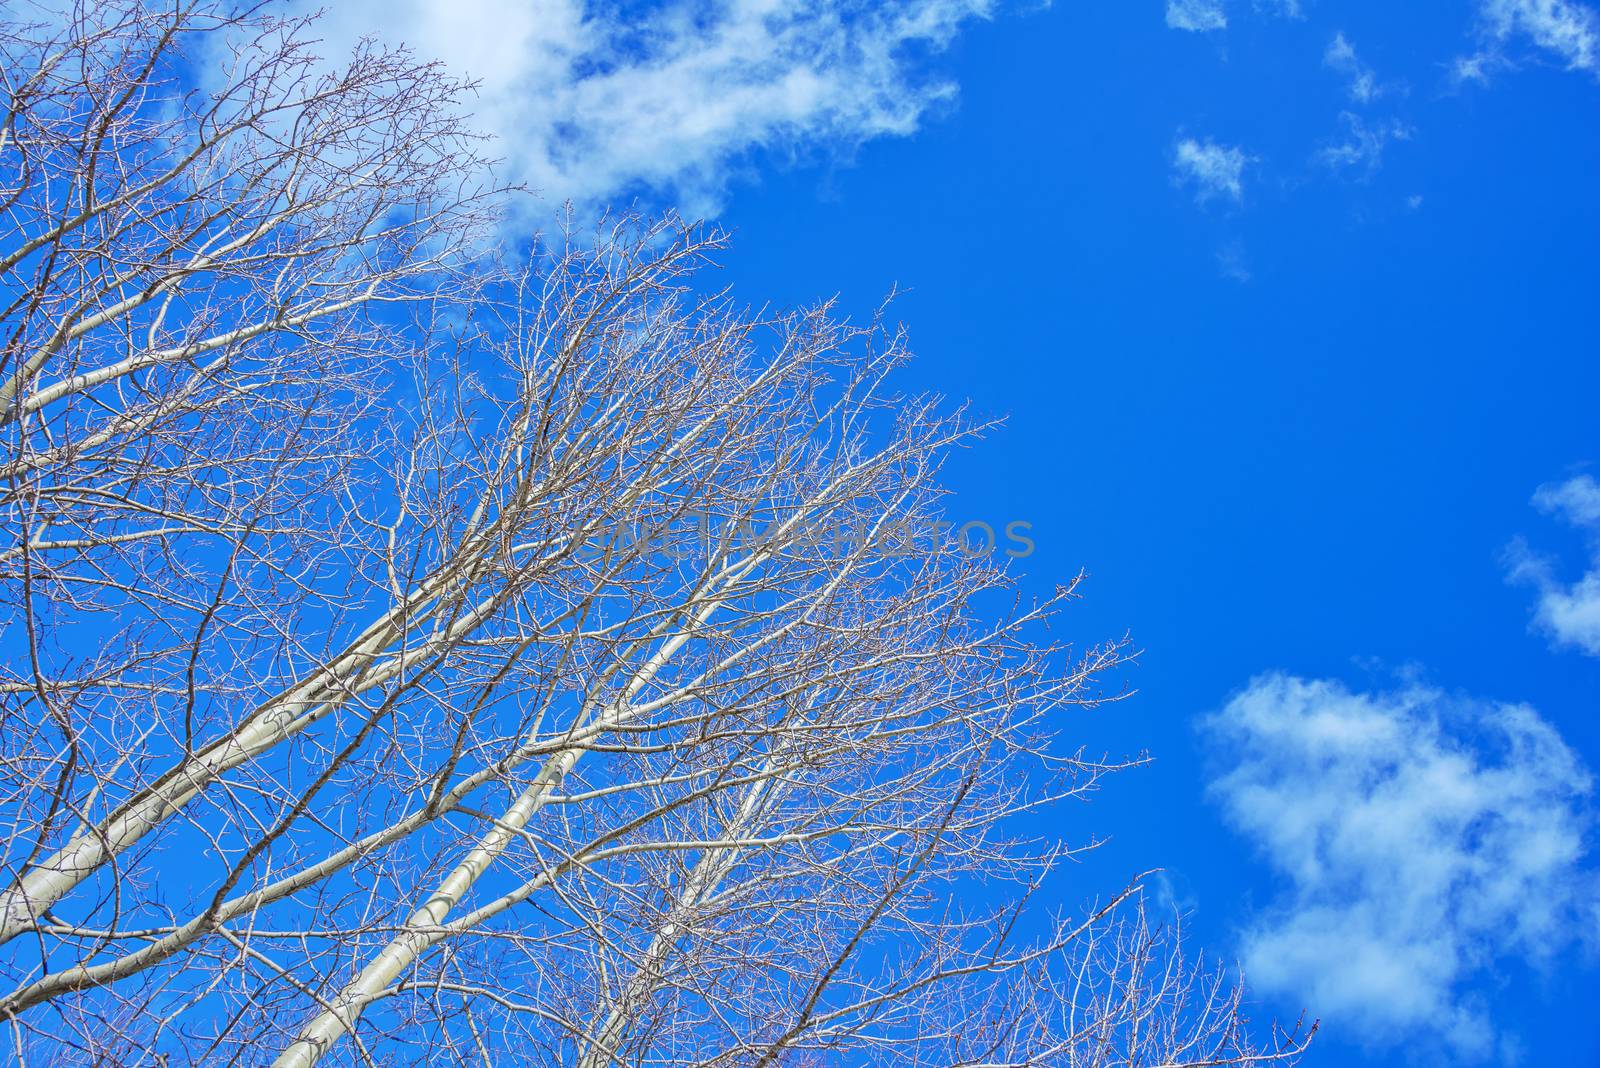 The tops of aspen trees, in the rays of the spring sun, without leaves against a blue sky with transparent clouds.